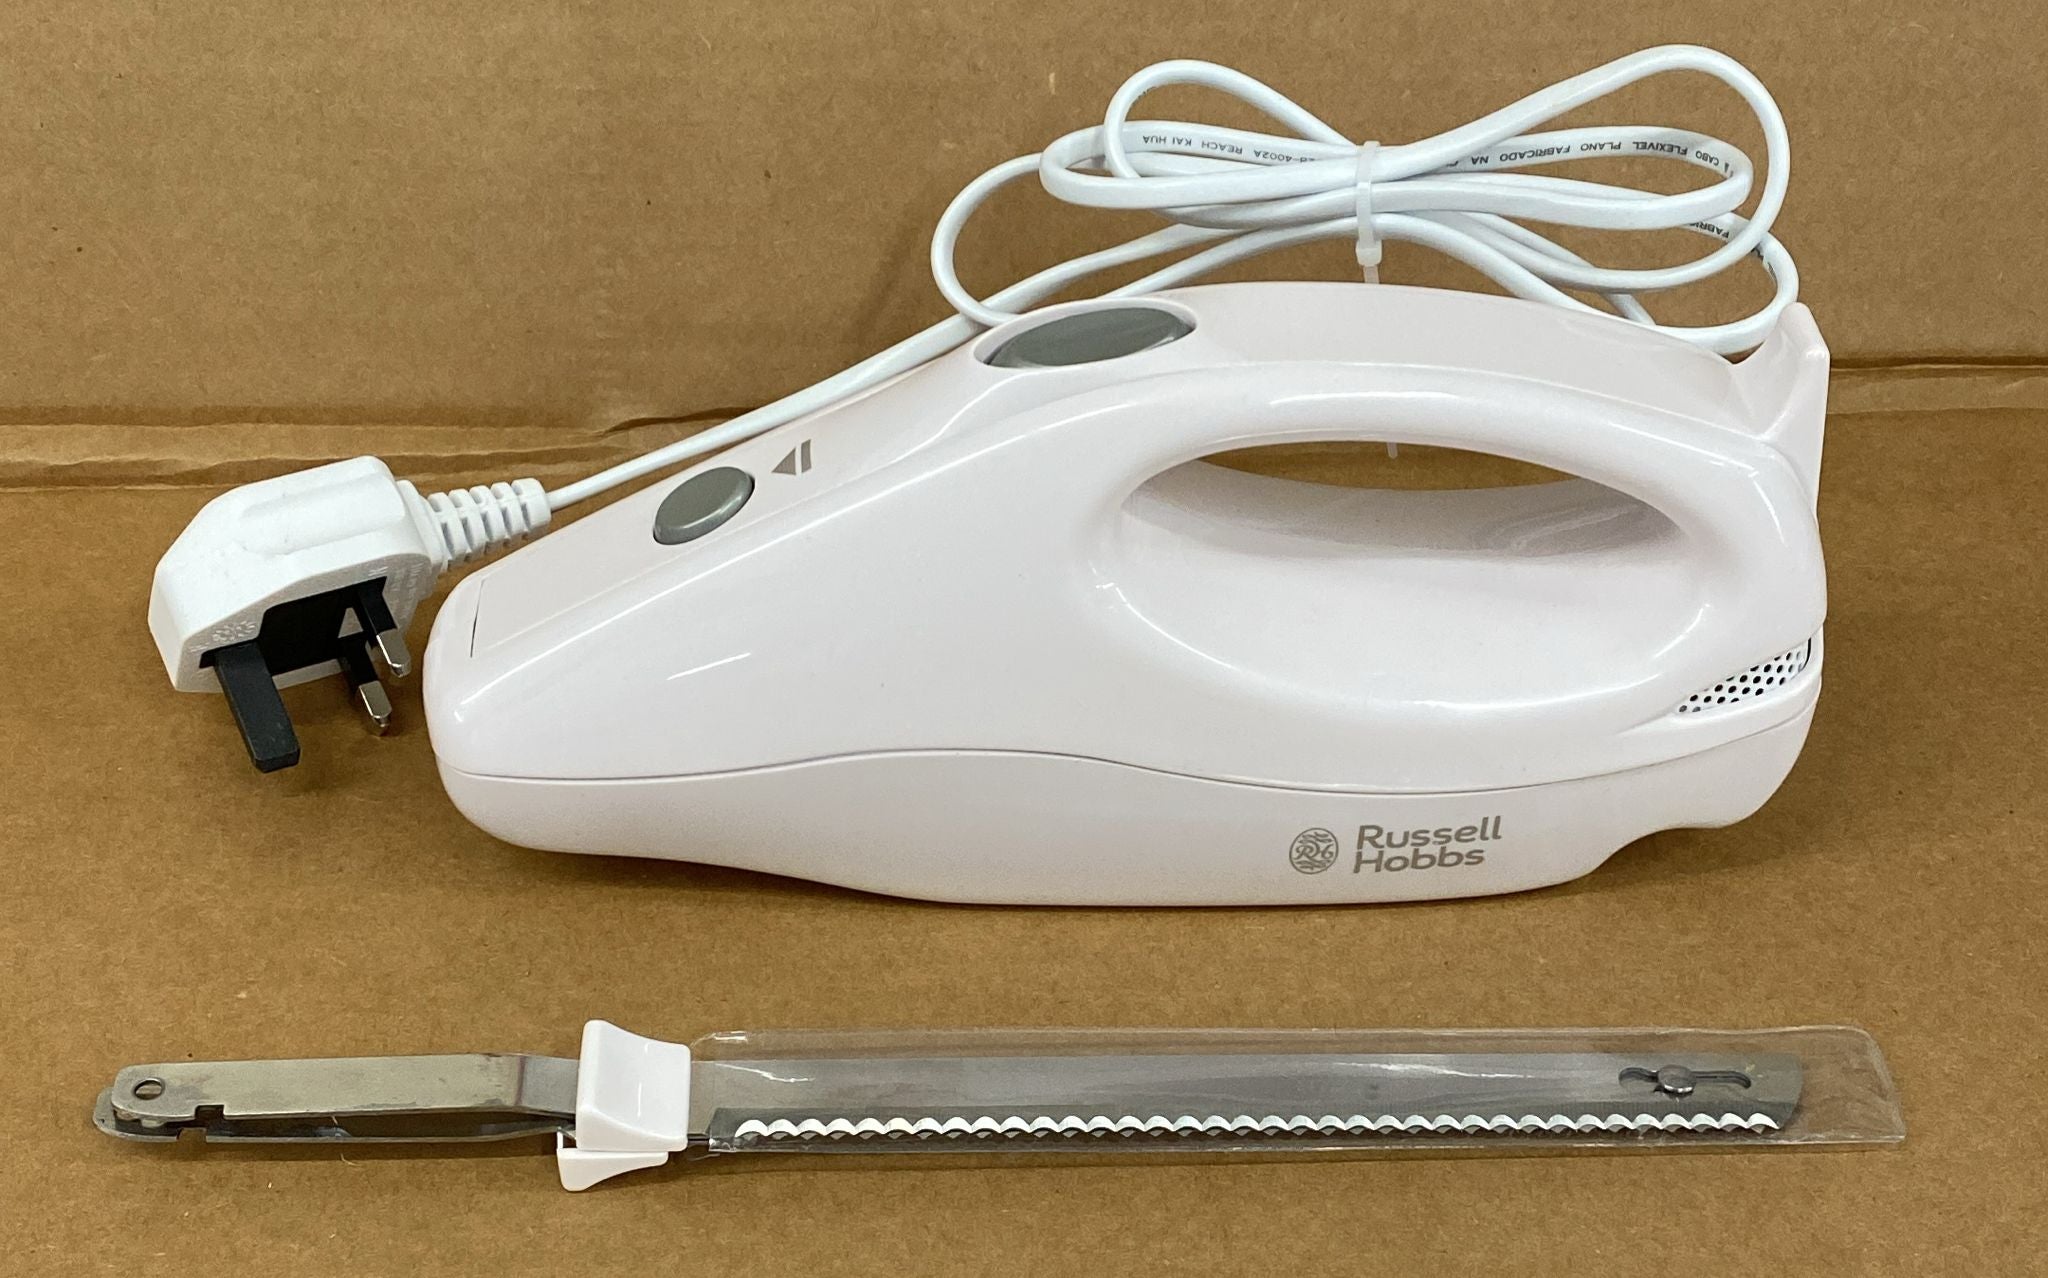 Russell Hobbs Electric Carving Knife Removable Blades White-5972no